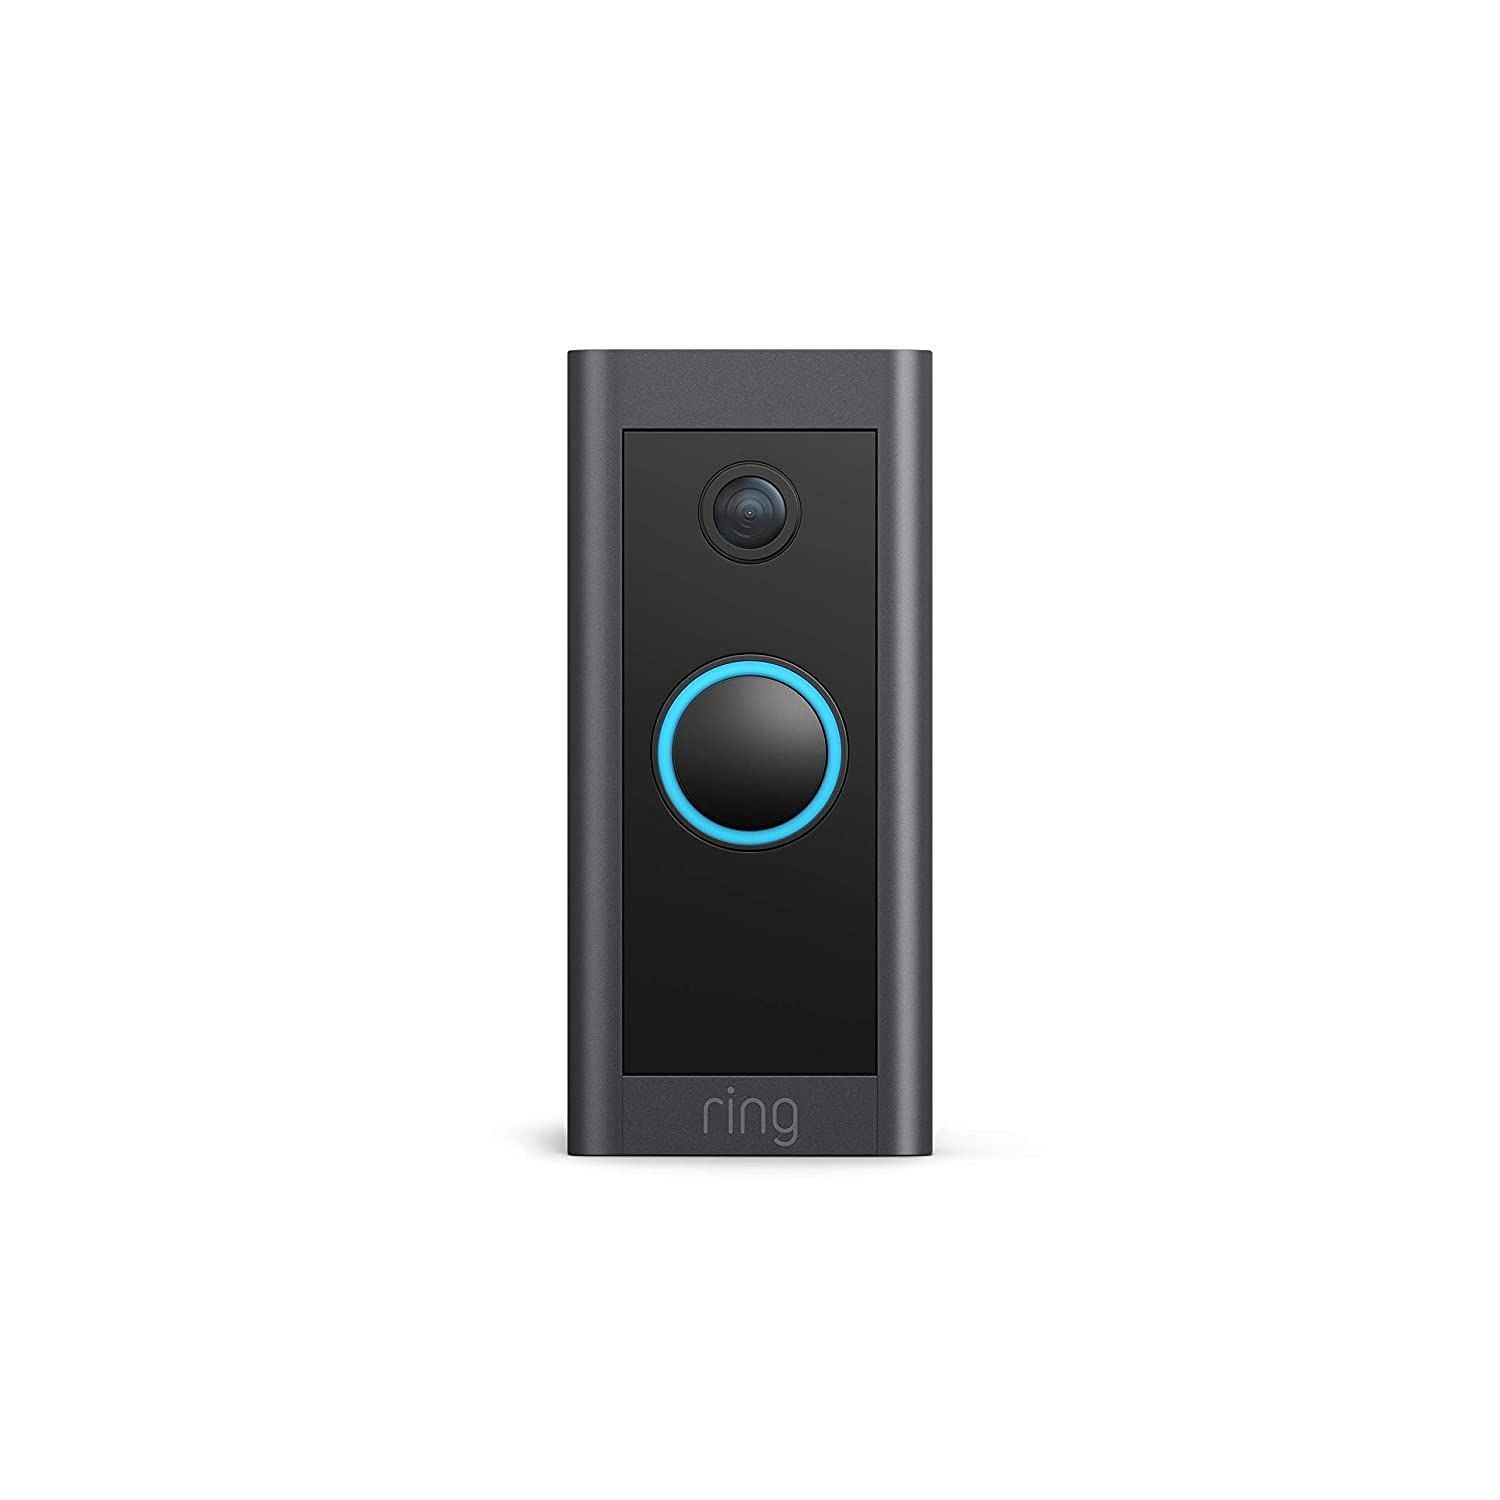 The wired Ring video doorbell (Image via Amazon)